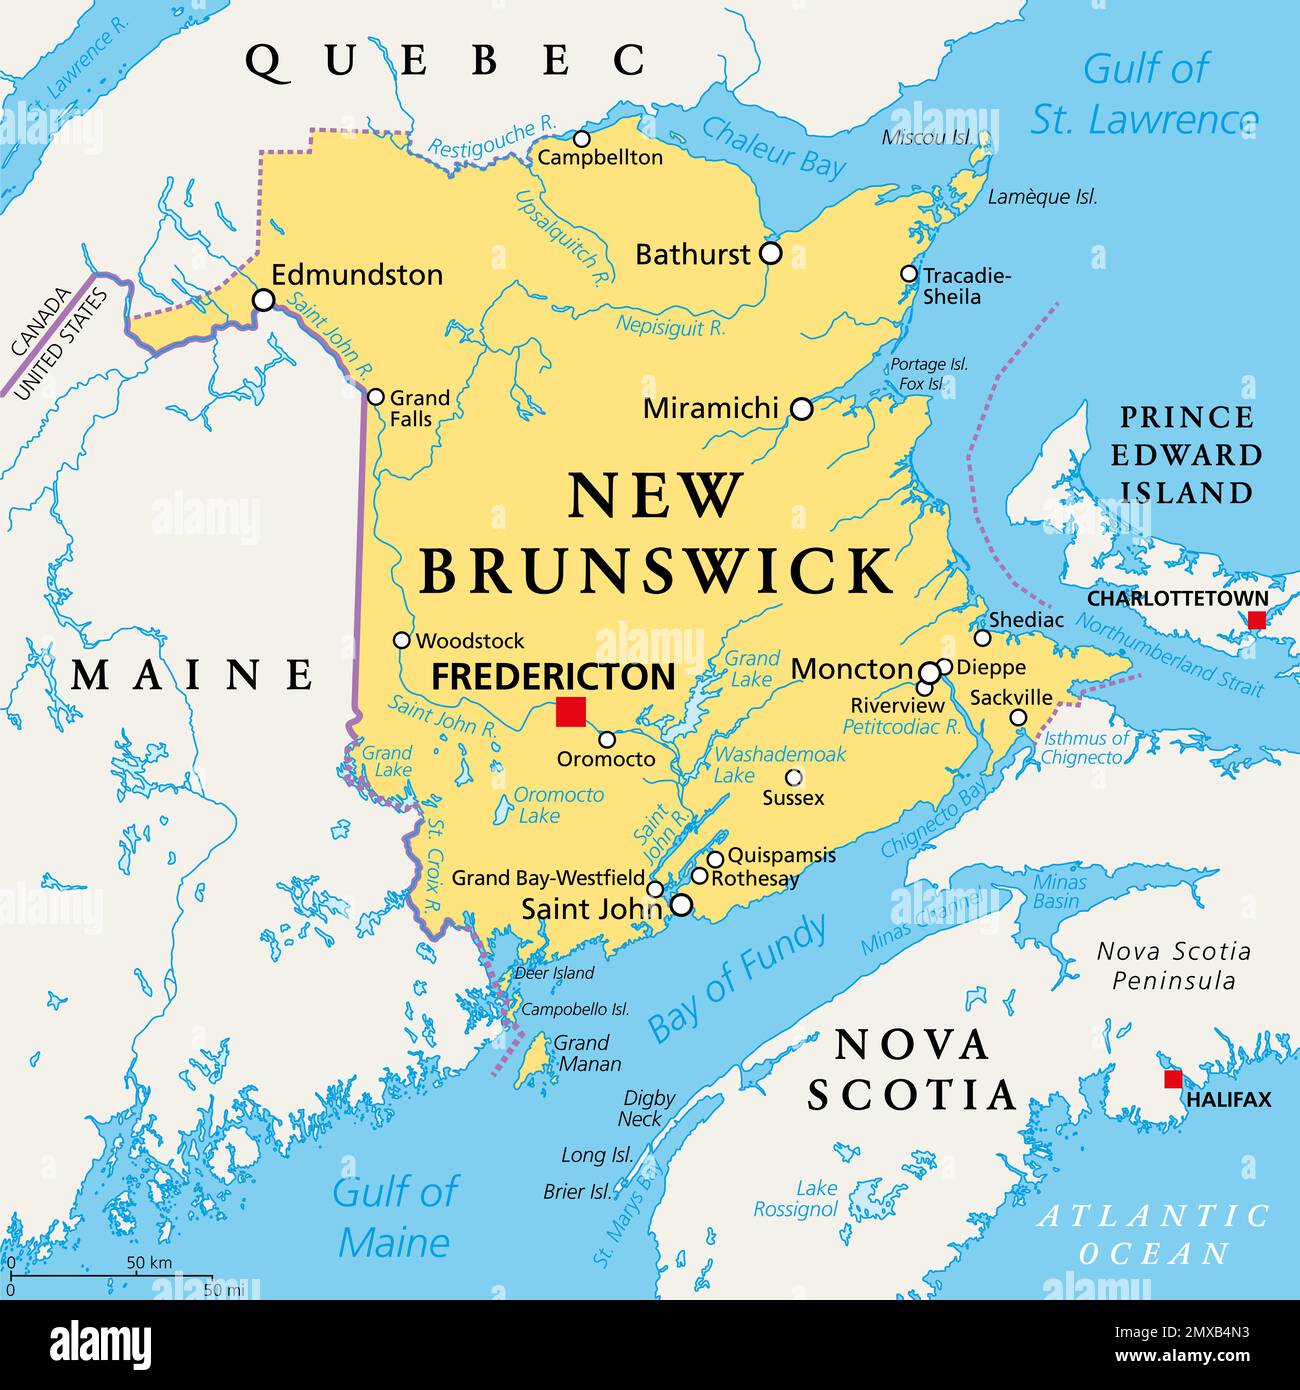 New Brunswick, Maritime and Atlantic province of Canada, political map. Bordered to Quebec, Nova Scotia, Gulf of St. Lawrence, Bay of Fundy and Maine. Stock Photo